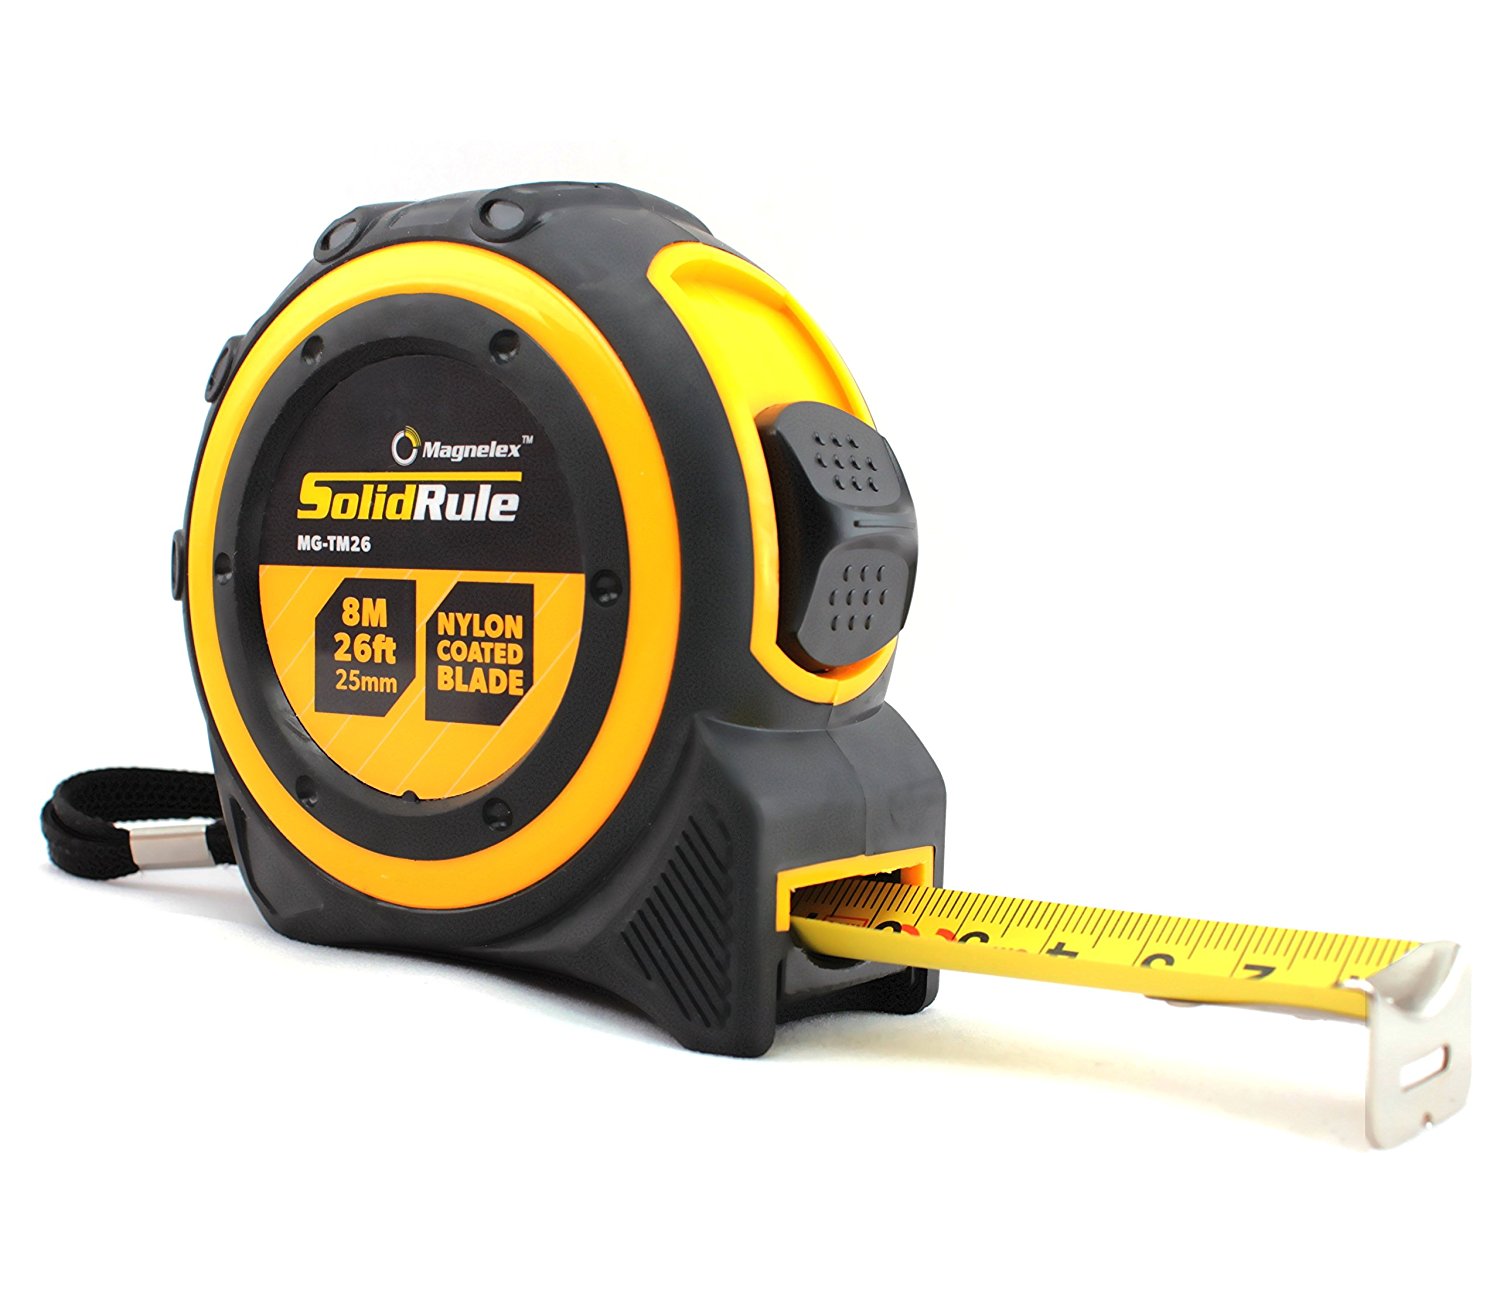 Tape Measure 26-Foot (8m) by Magnelex, Inches and Metric Measuring ...